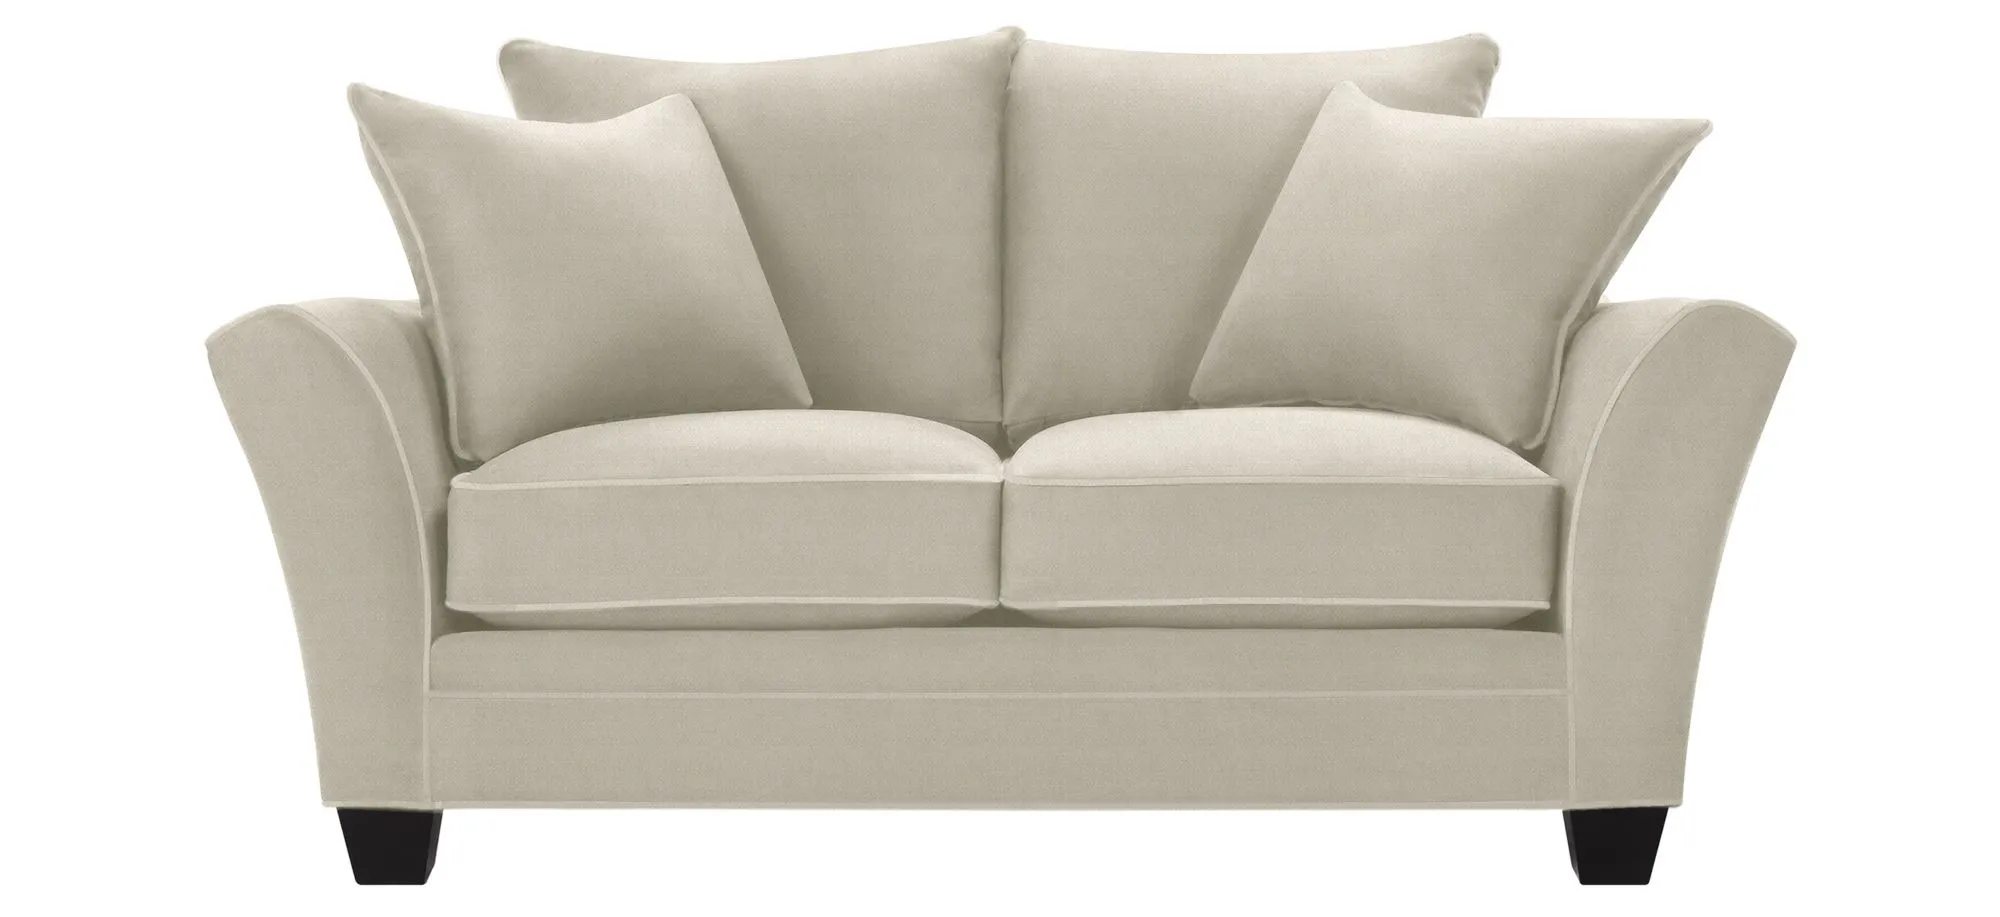 Briarwood Loveseat in Sugar Shack Putty by H.M. Richards